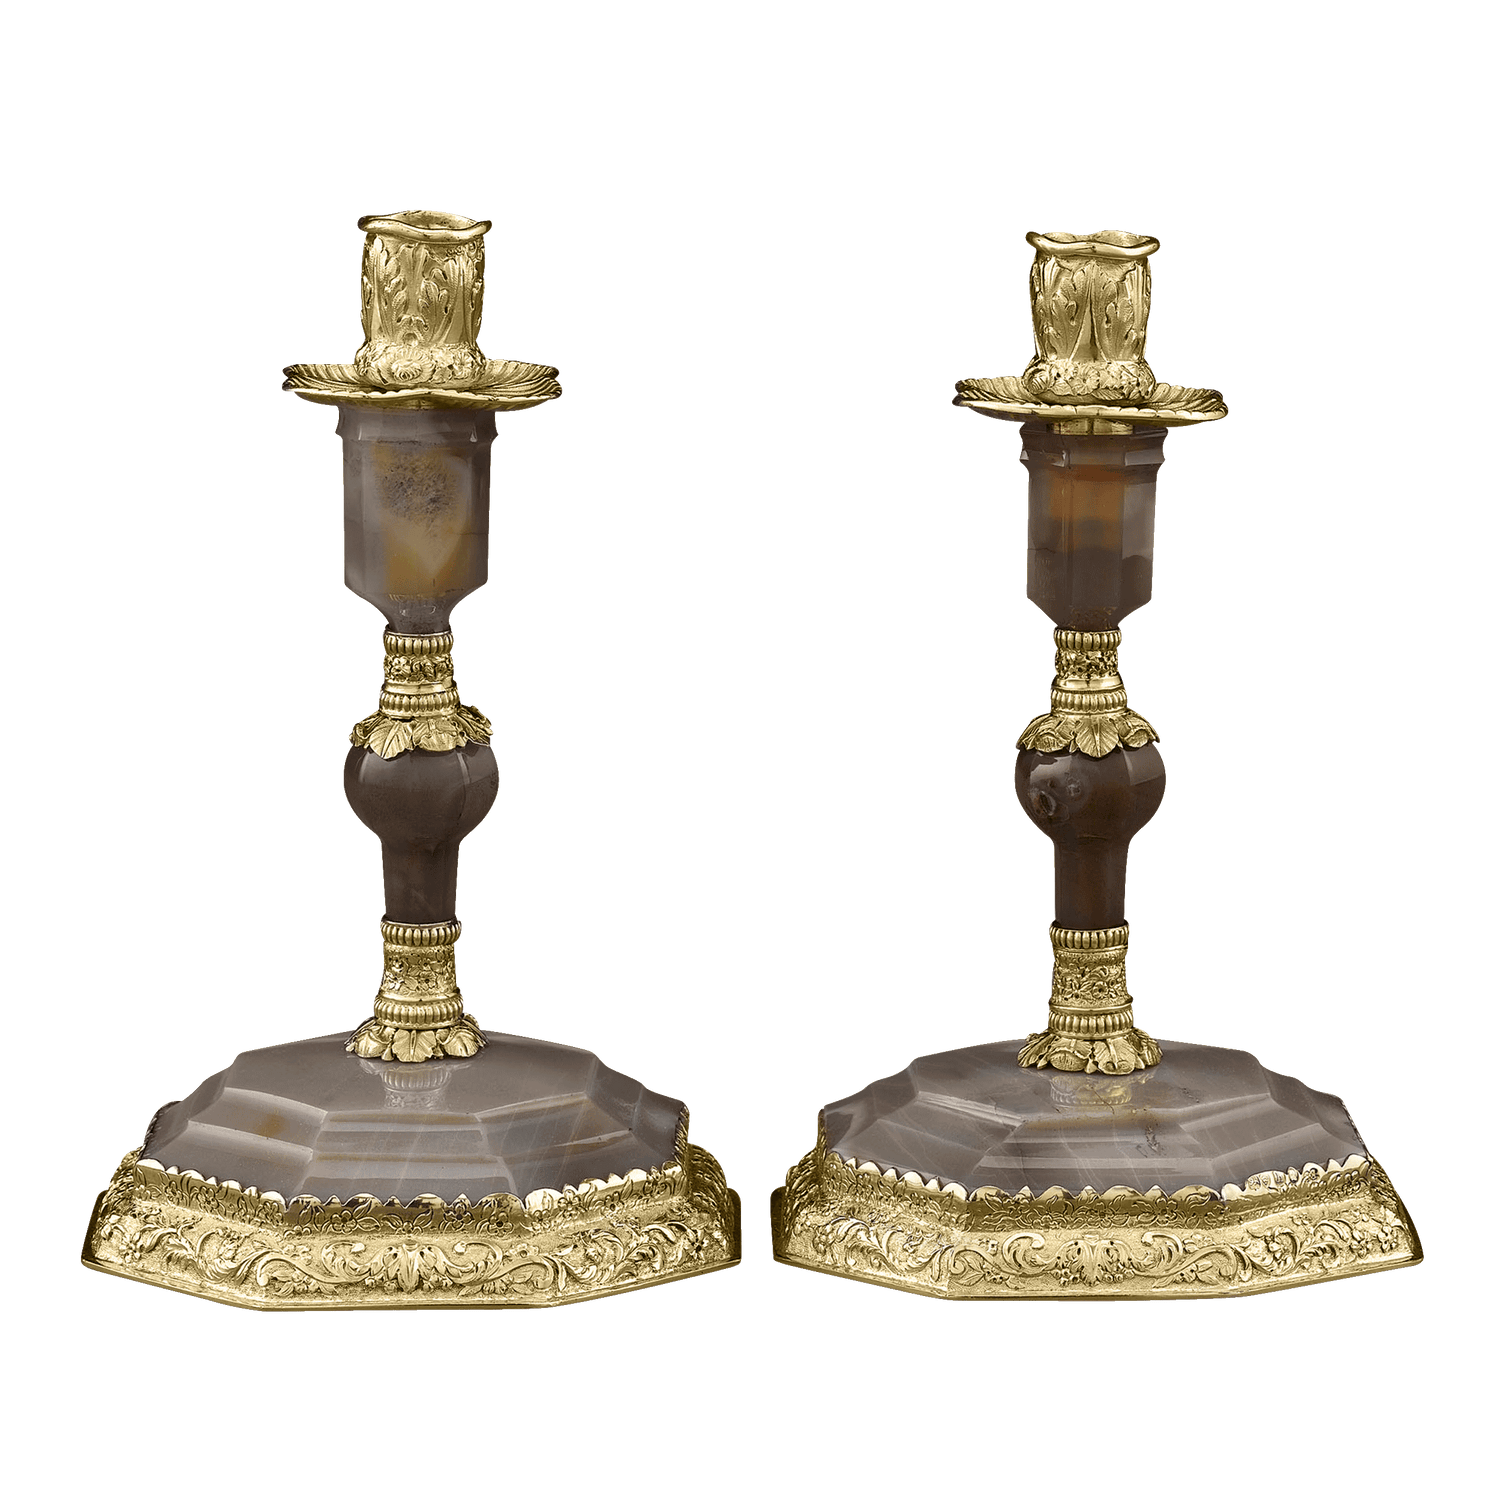 A spectacular pair of George IV candlesticks by renowned English silversmith Edward Farrell